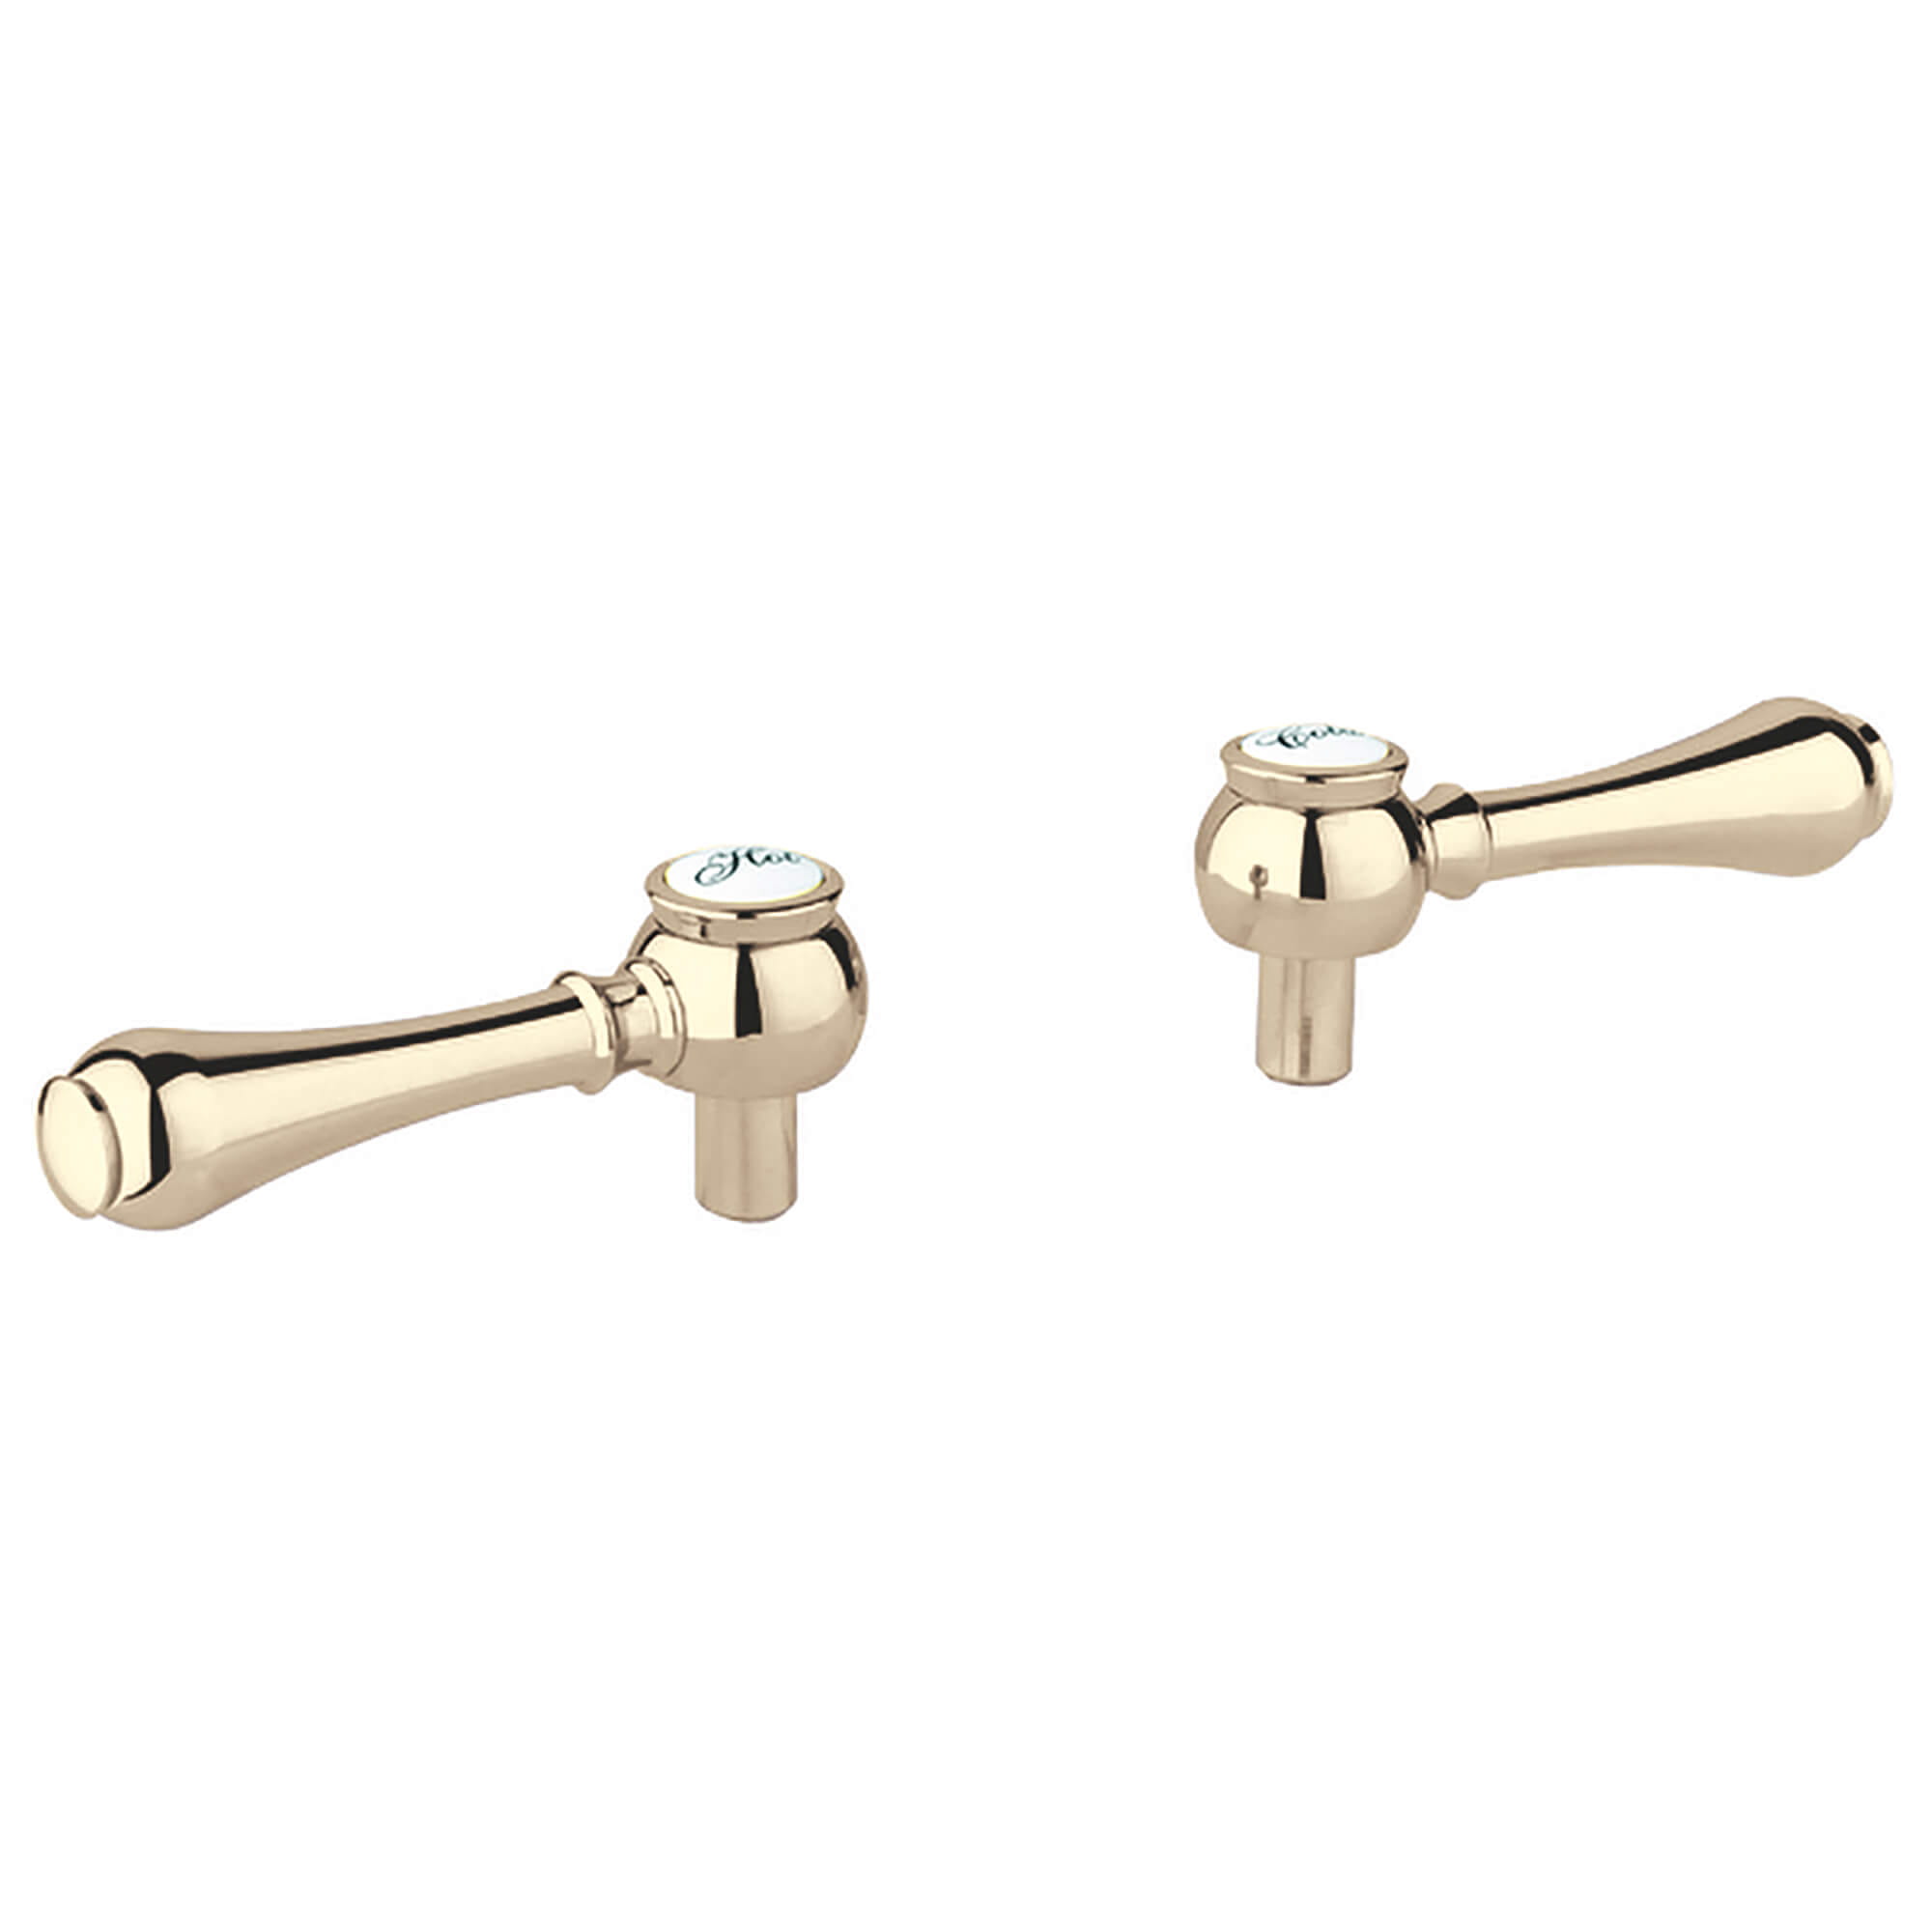 Geneva Manettes leviers la paire GROHE POLISHED BRASS